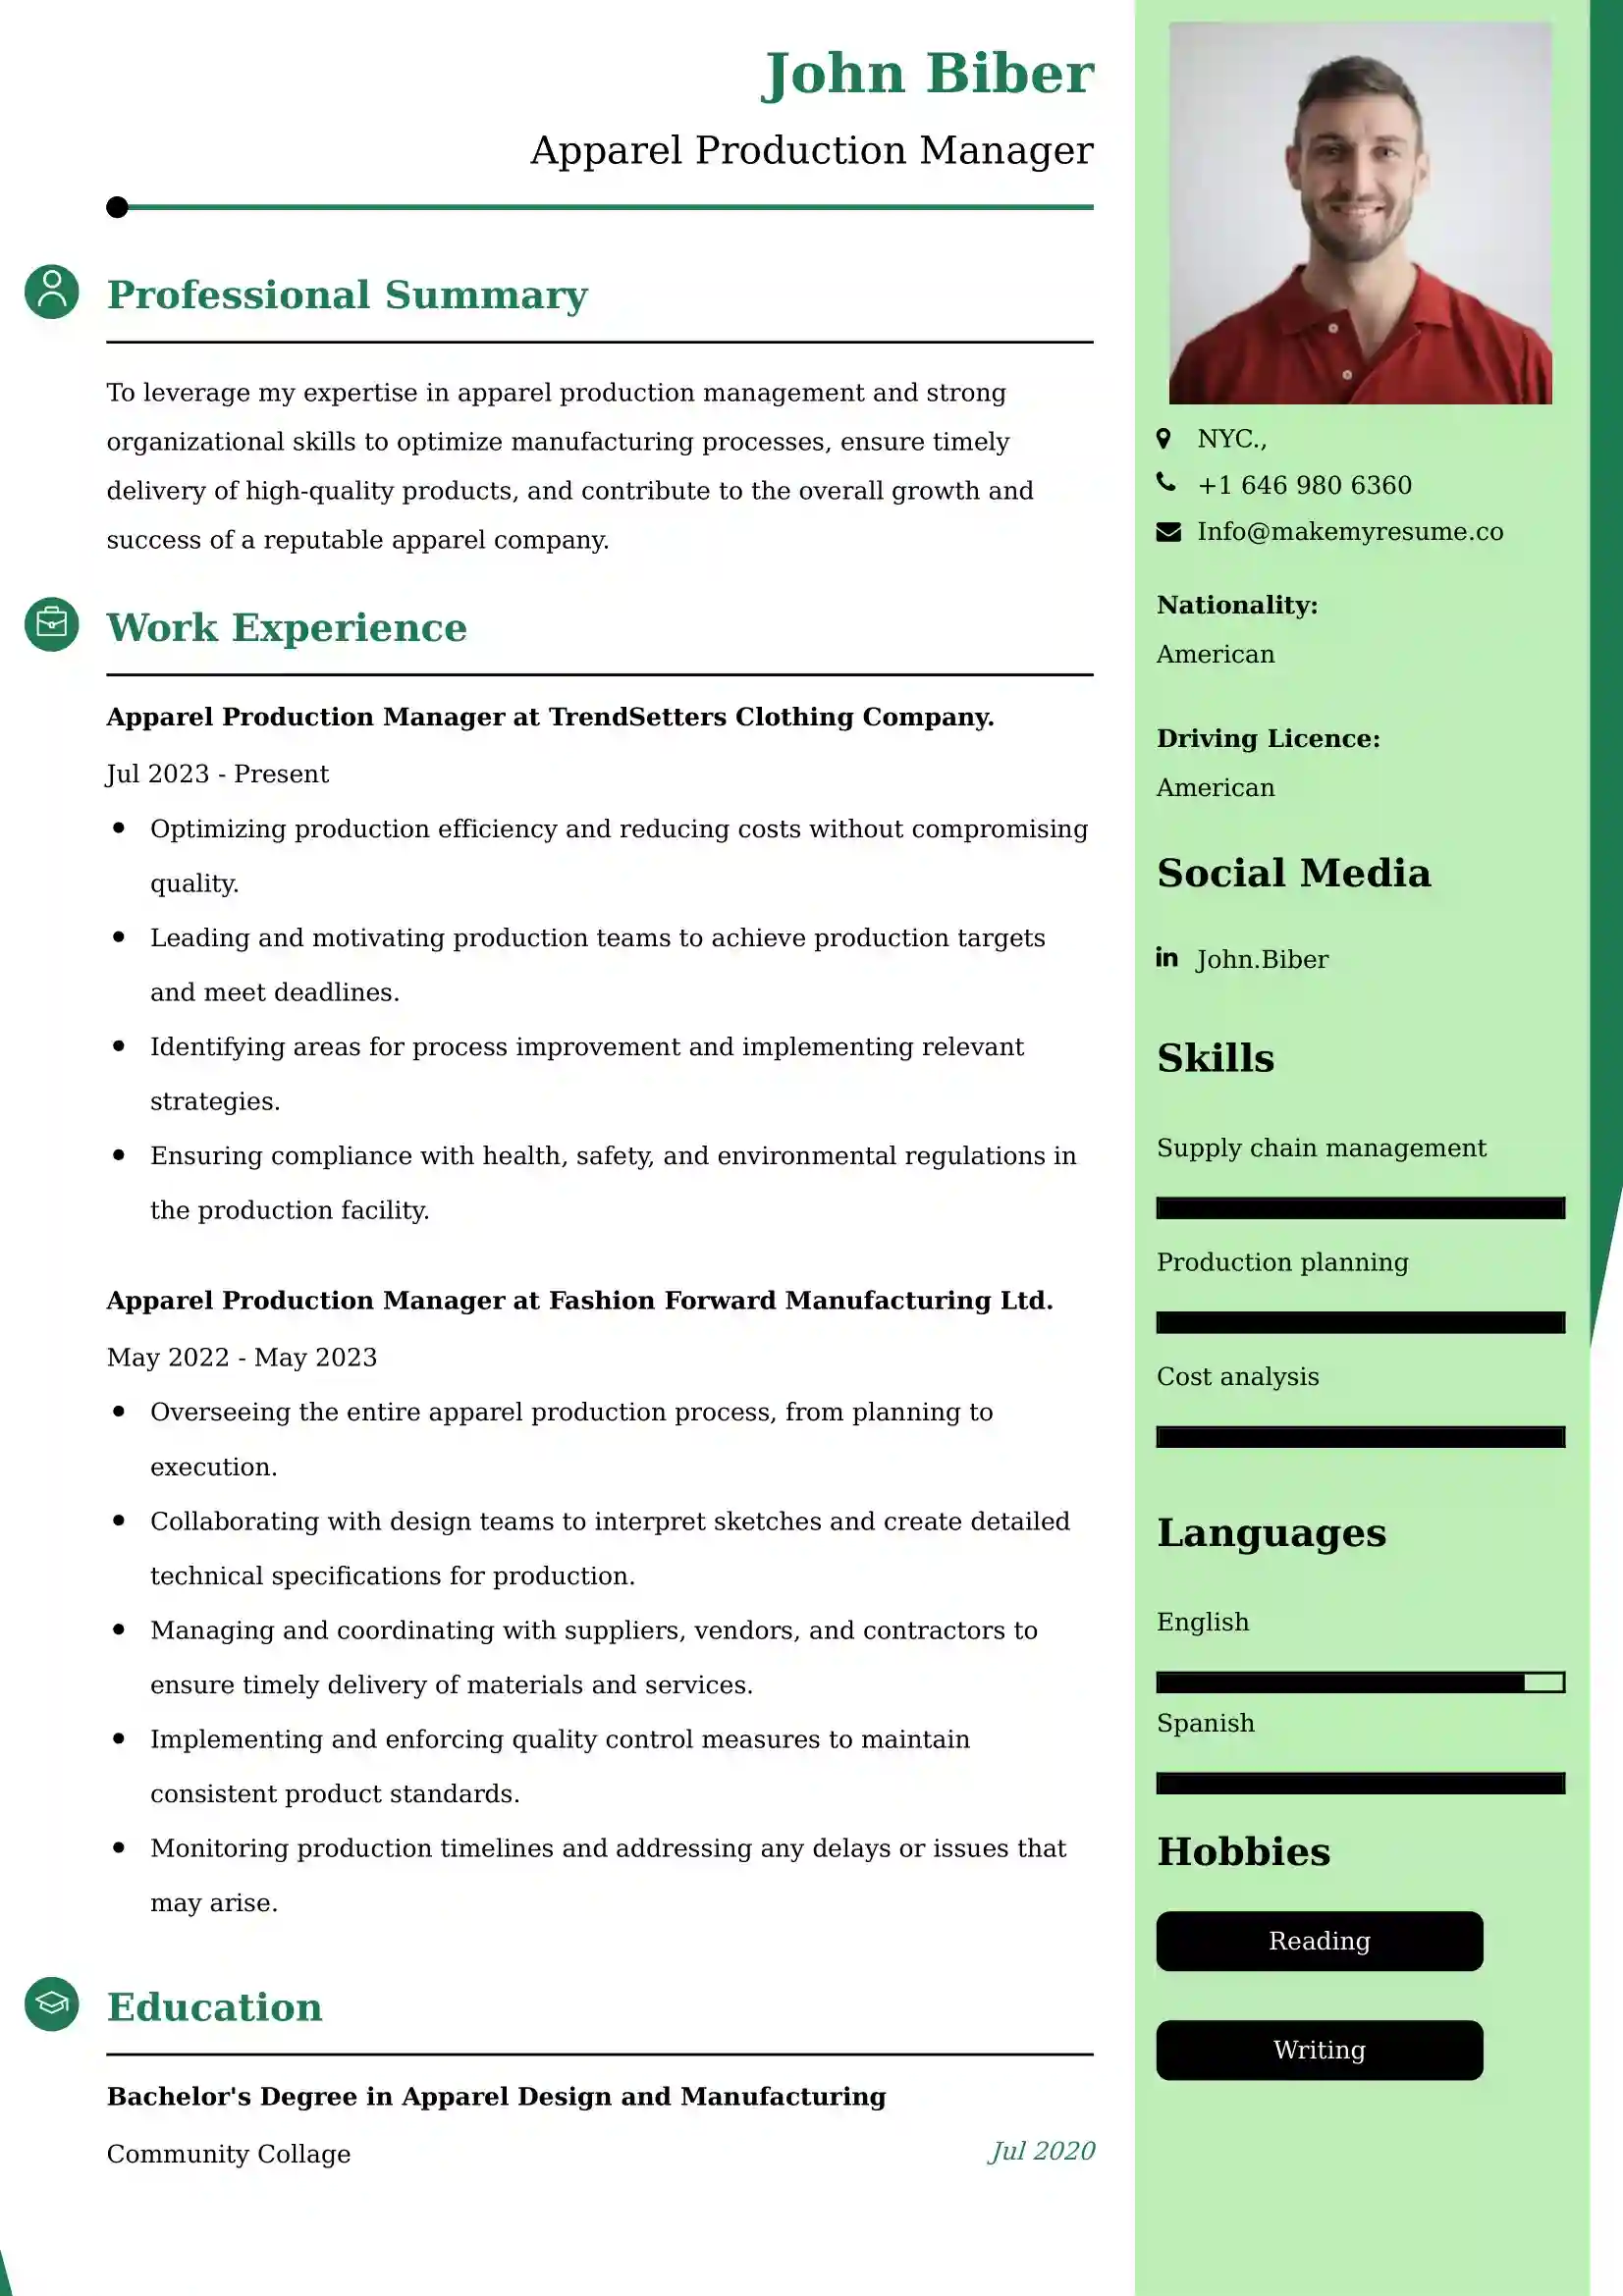 Apparel Production Manager Resume Examples - Brazilian Format, Latest Template